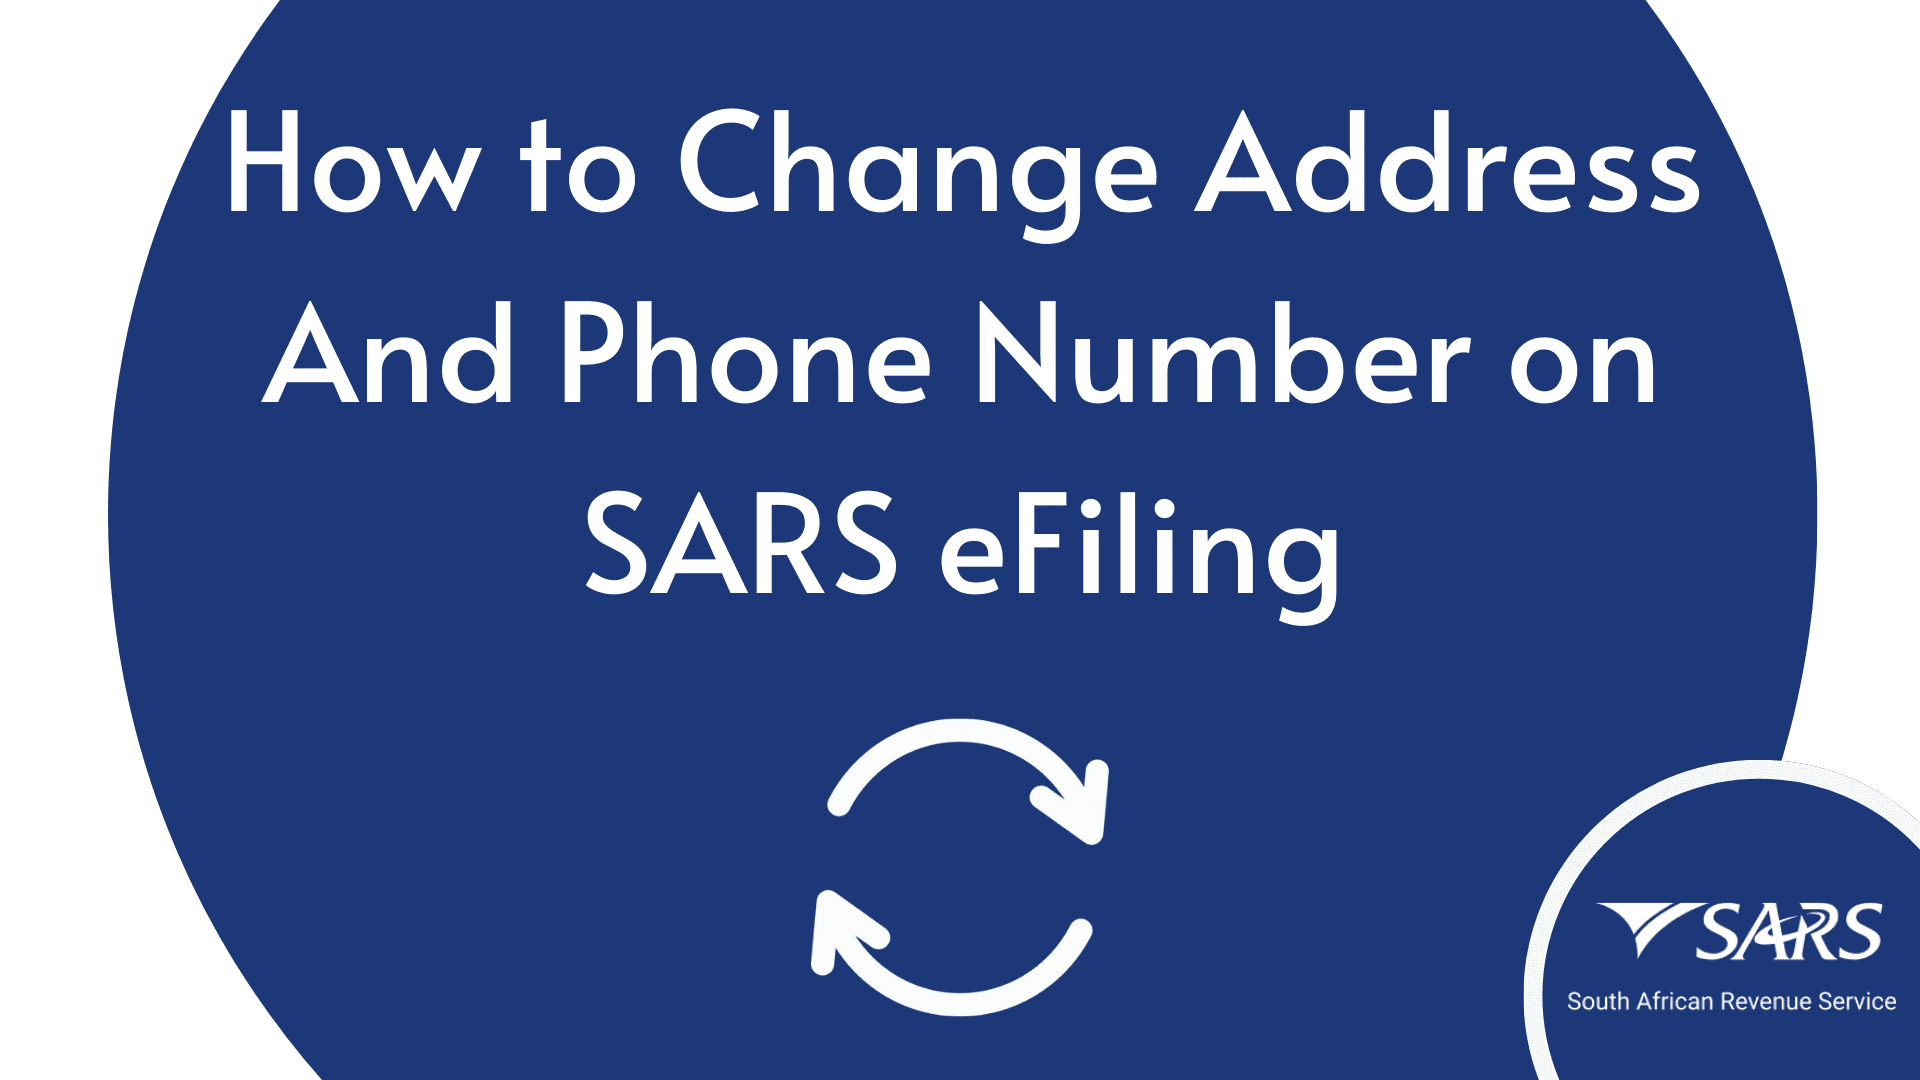 How to Change Address And Phone Number on SARS eFiling